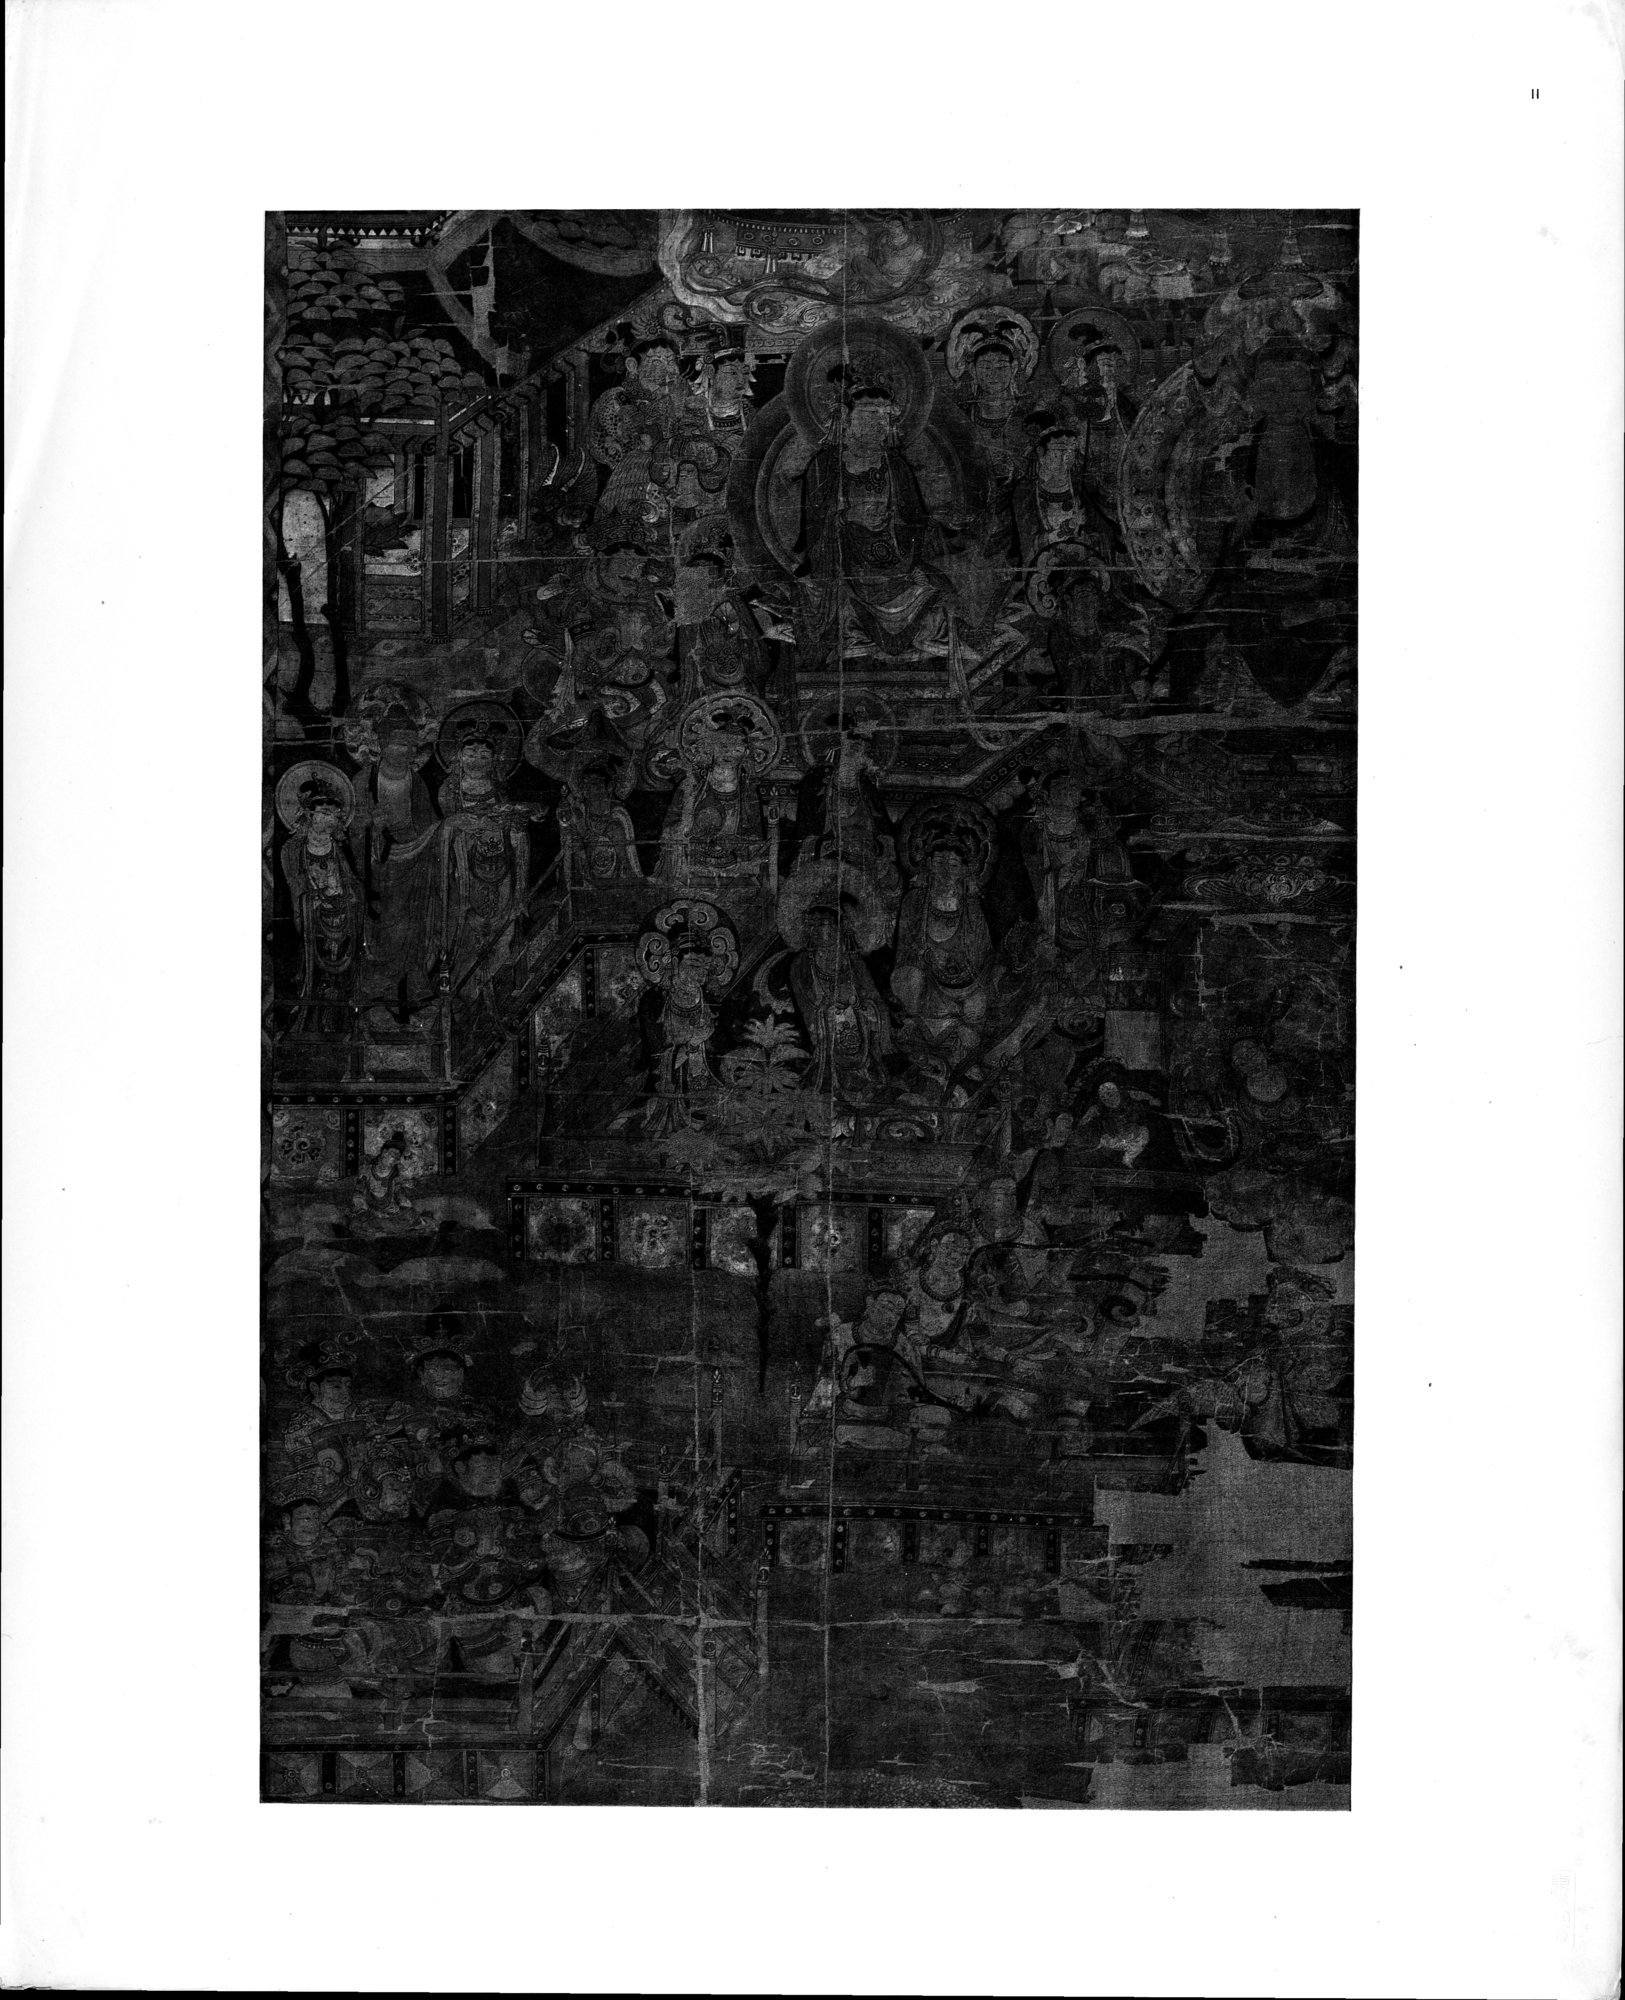 The Thousand Buddhas : vol.1 / Page 87 (Grayscale High Resolution Image)